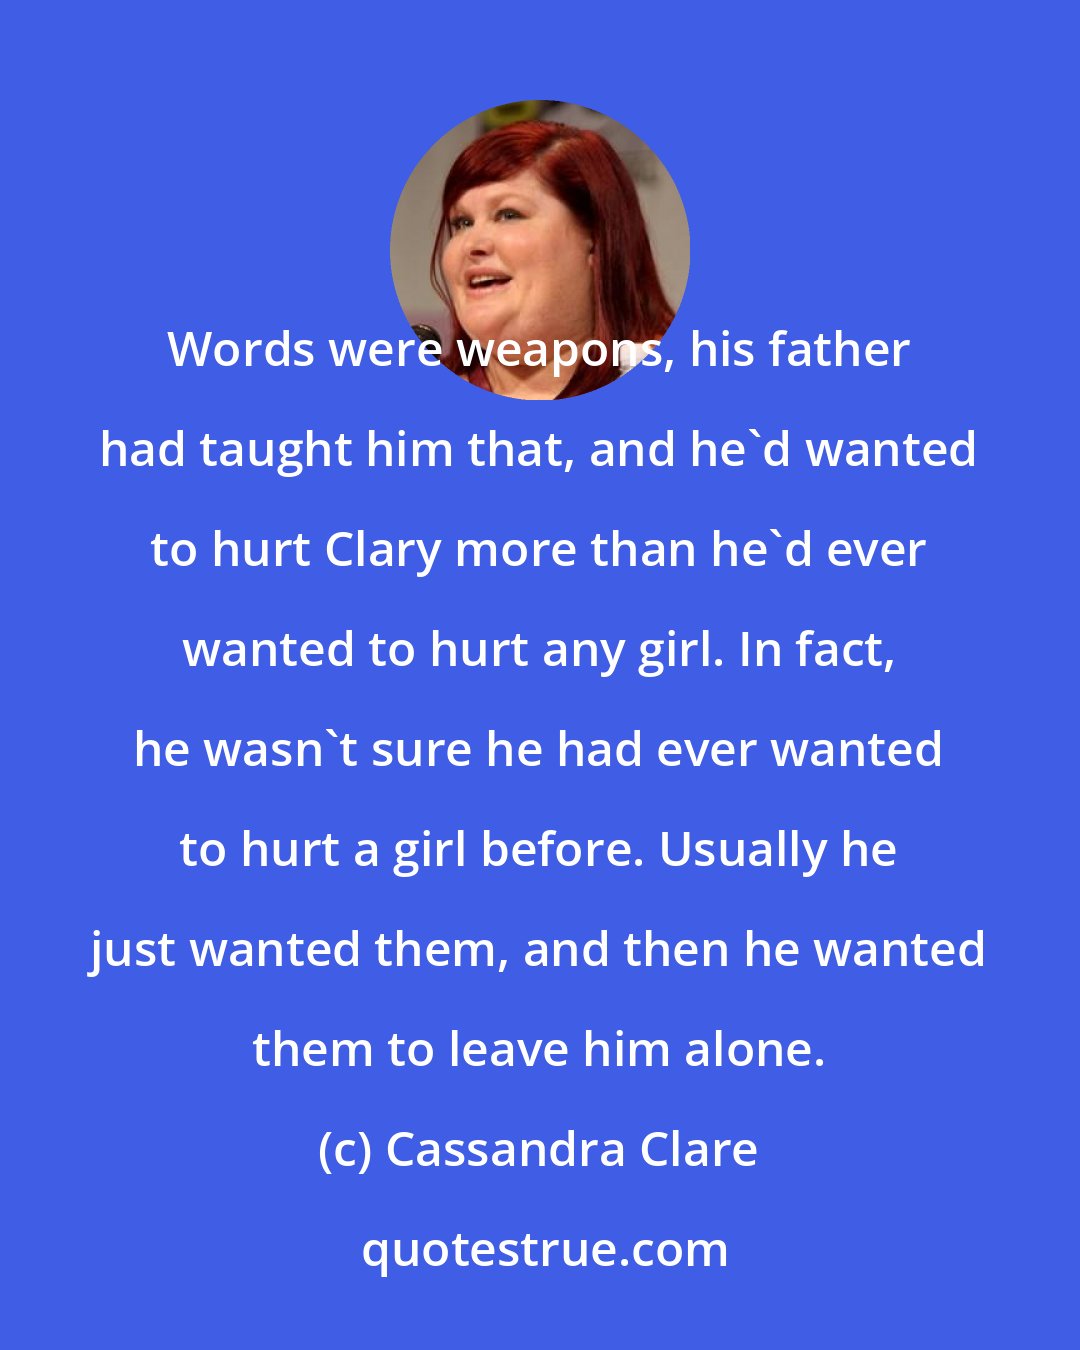 Cassandra Clare: Words were weapons, his father had taught him that, and he'd wanted to hurt Clary more than he'd ever wanted to hurt any girl. In fact, he wasn't sure he had ever wanted to hurt a girl before. Usually he just wanted them, and then he wanted them to leave him alone.